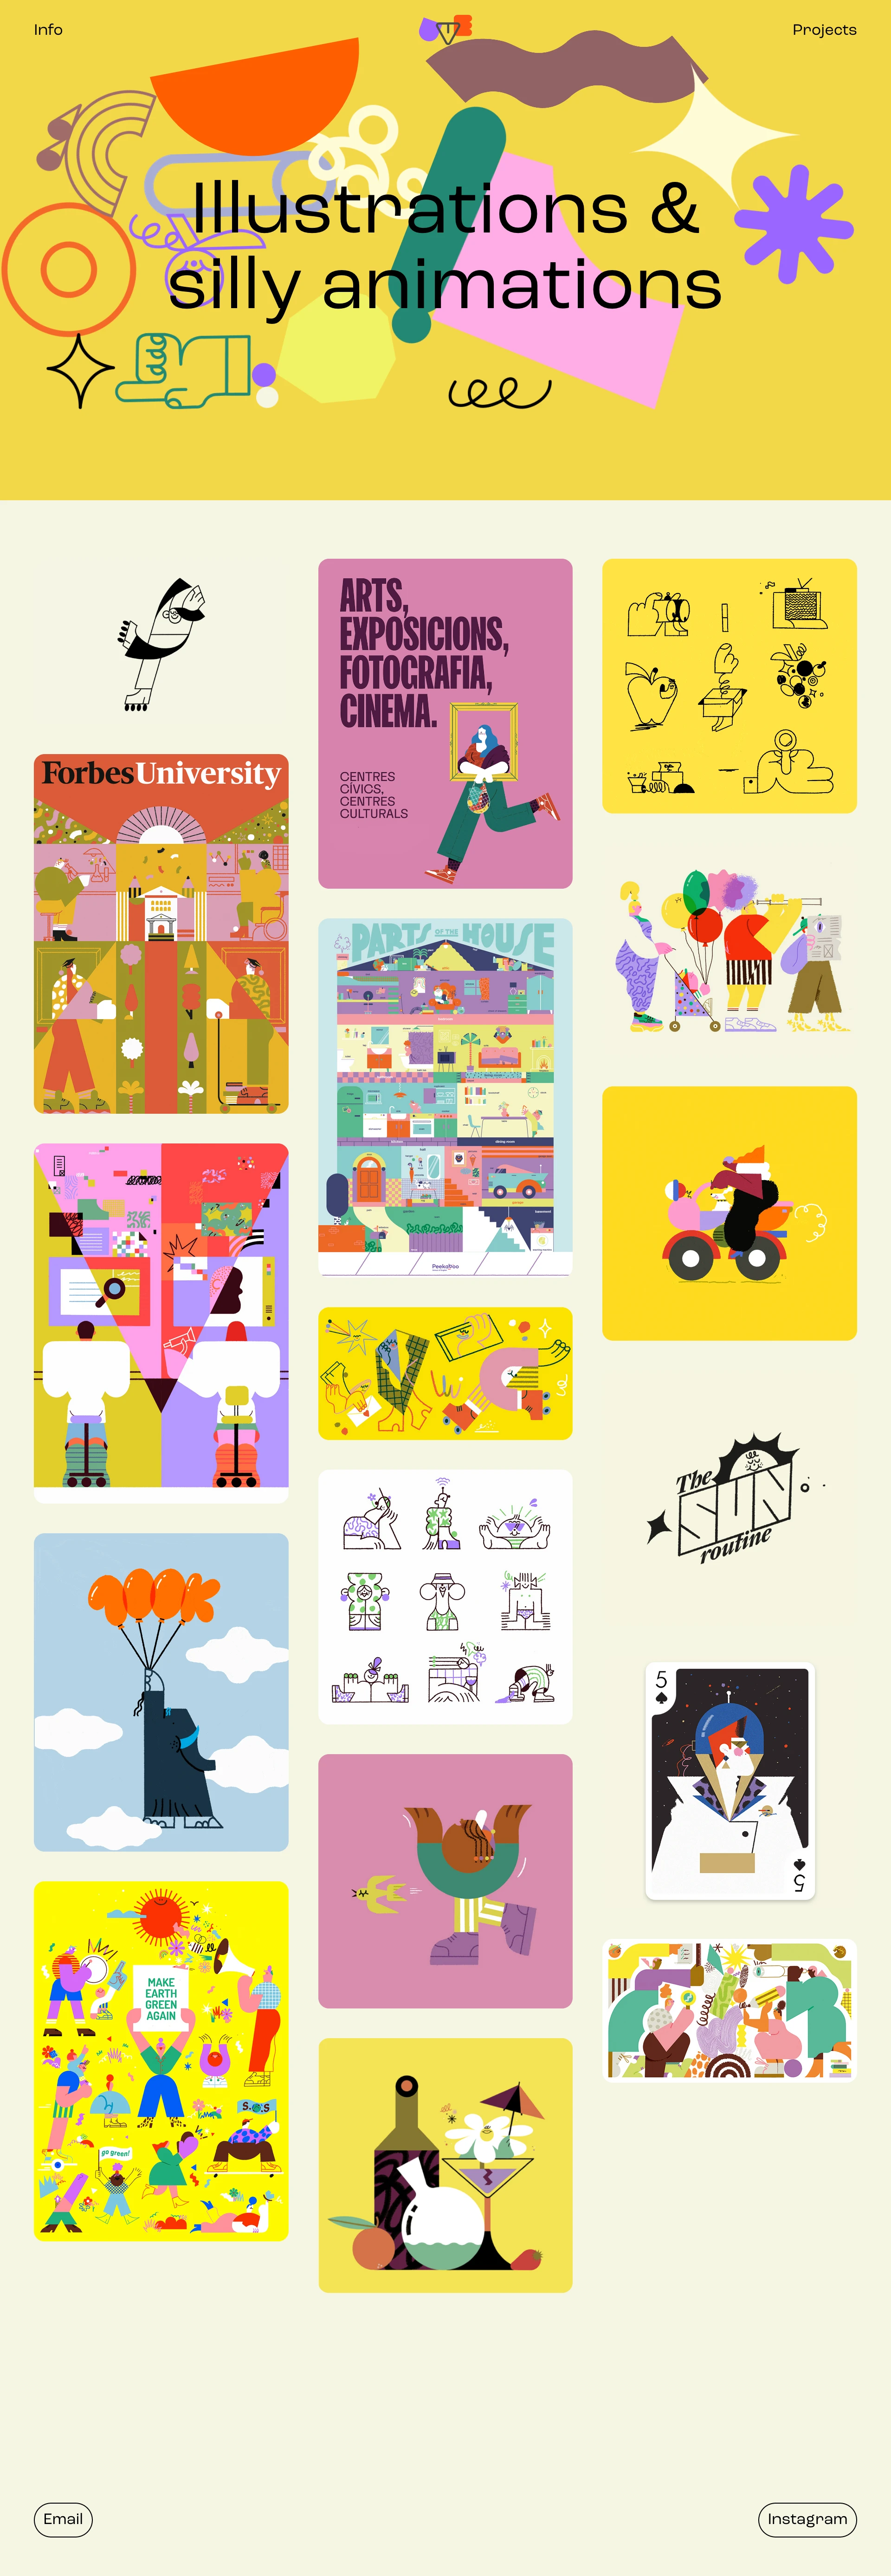 Antonio Uve Landing Page Example: Silly animations and colorful illustrations.